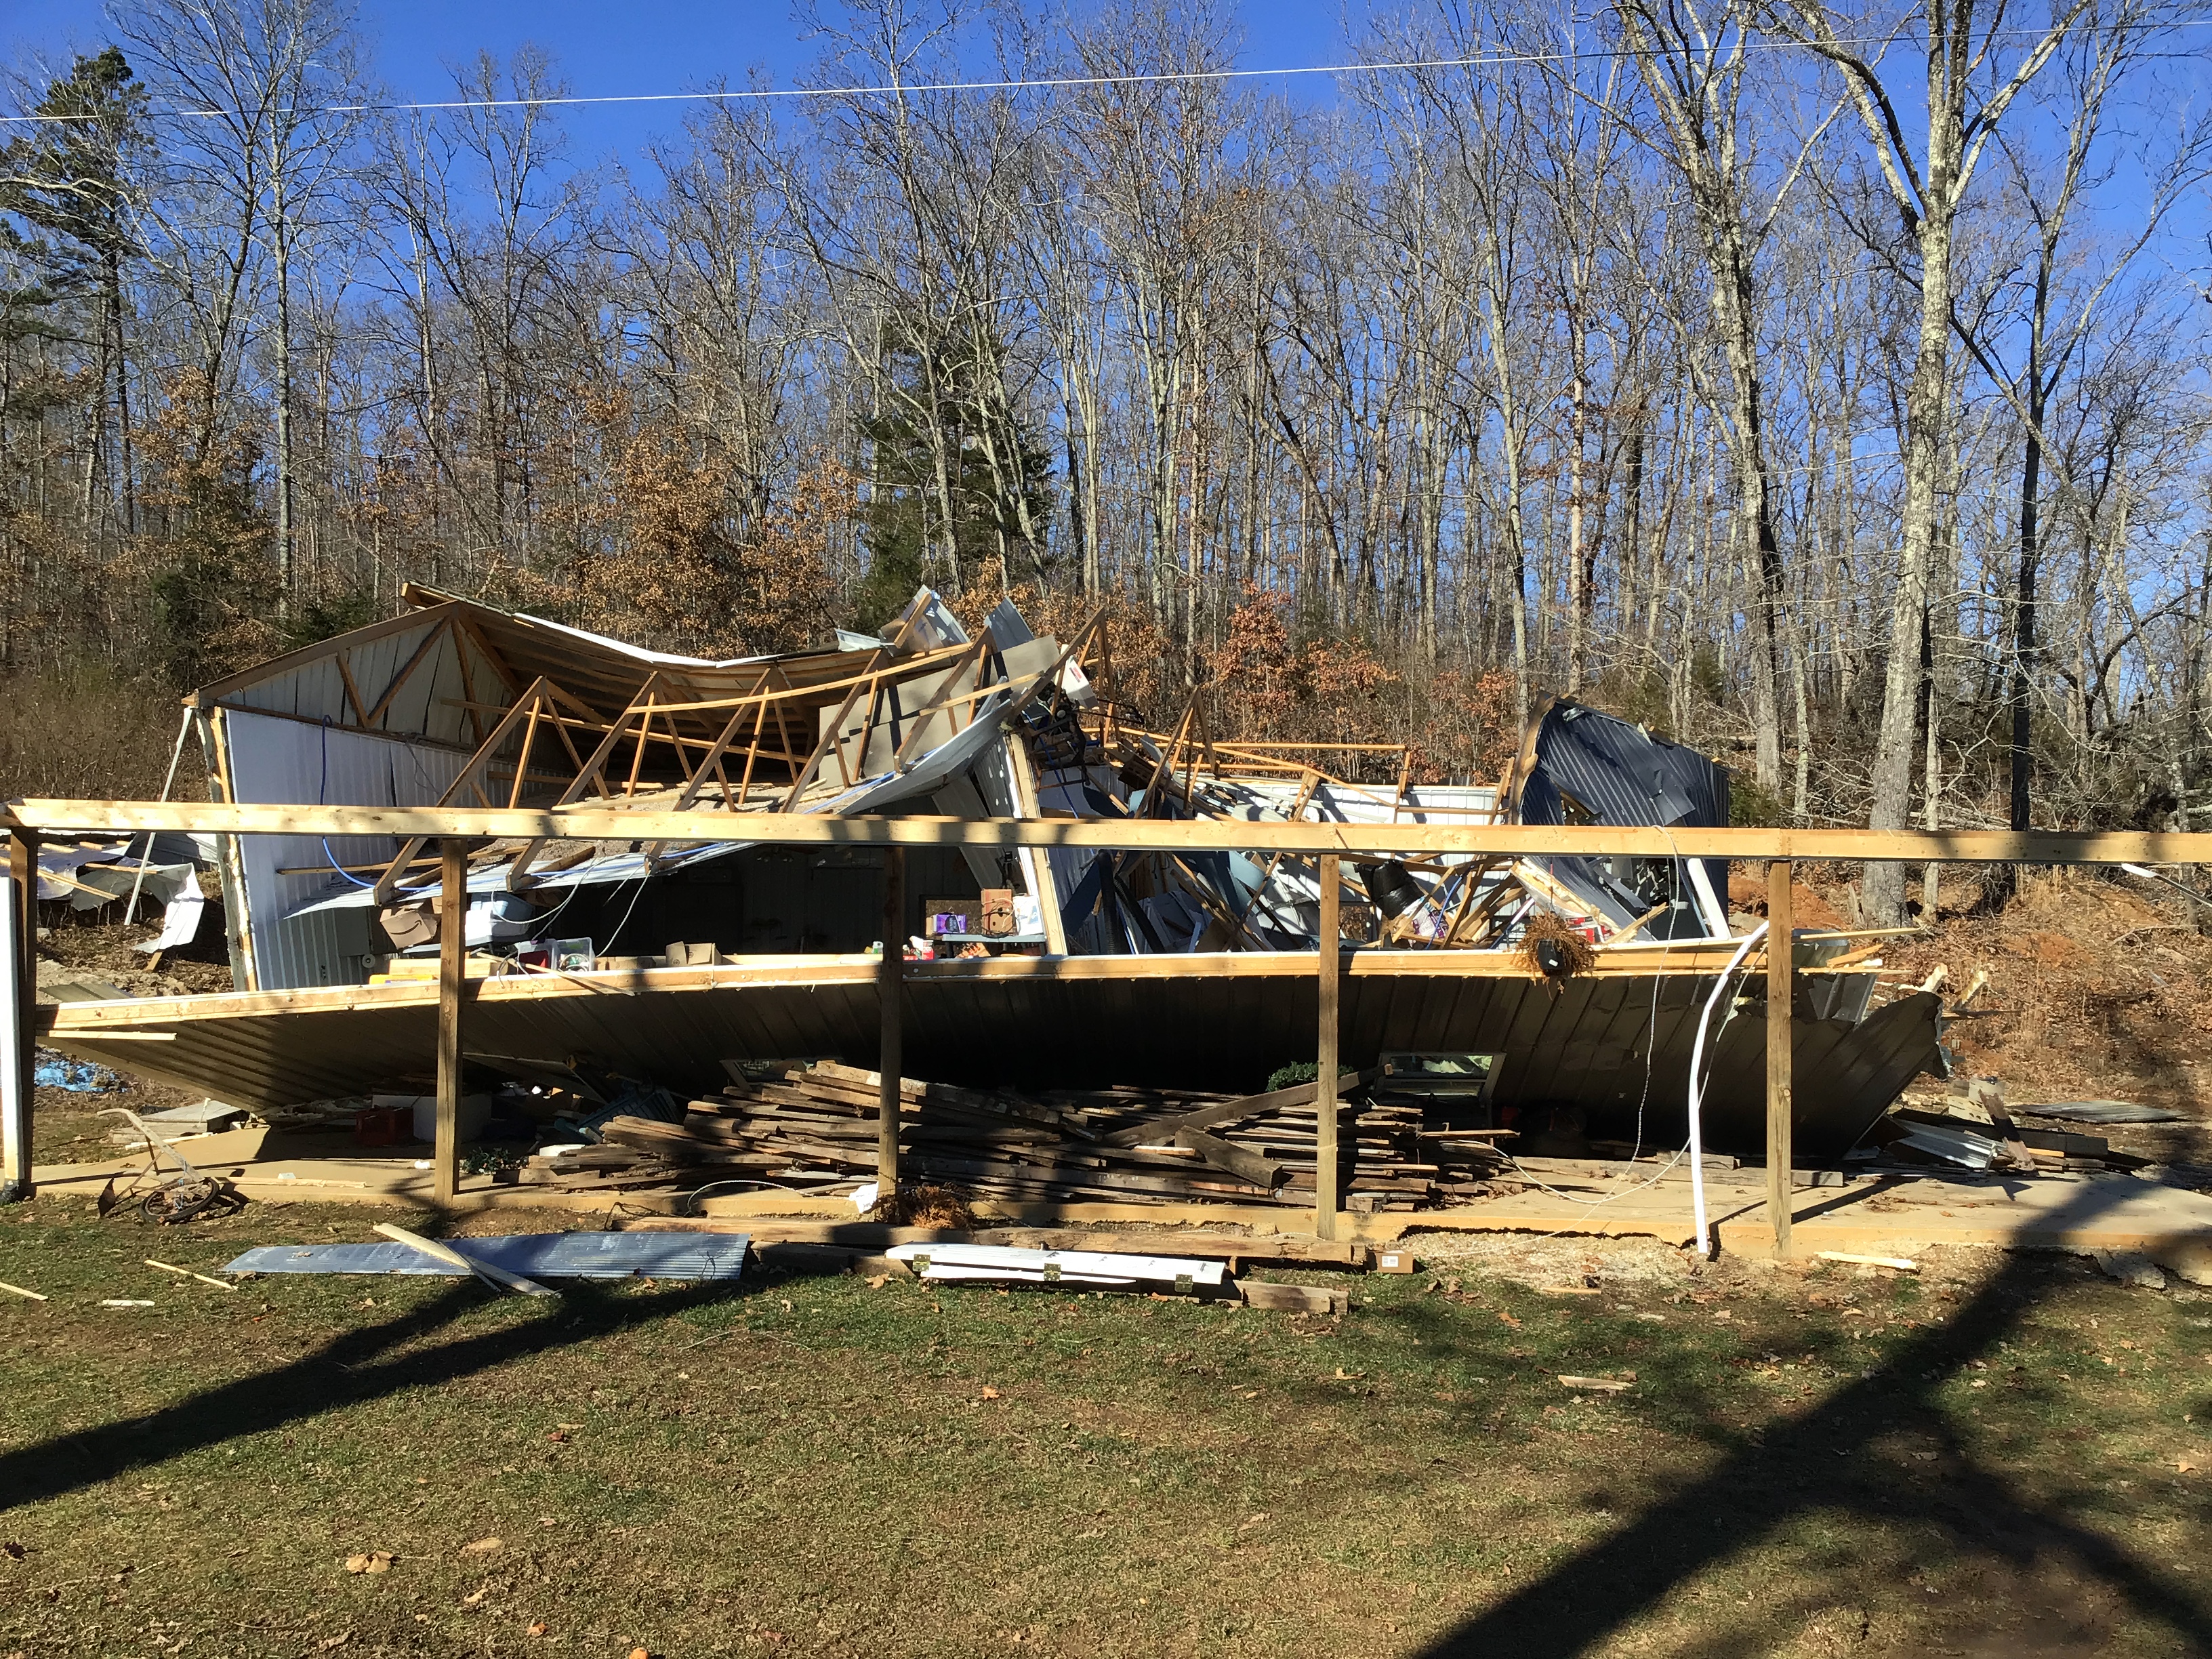 Machine shed destroyed off of County Road 442.